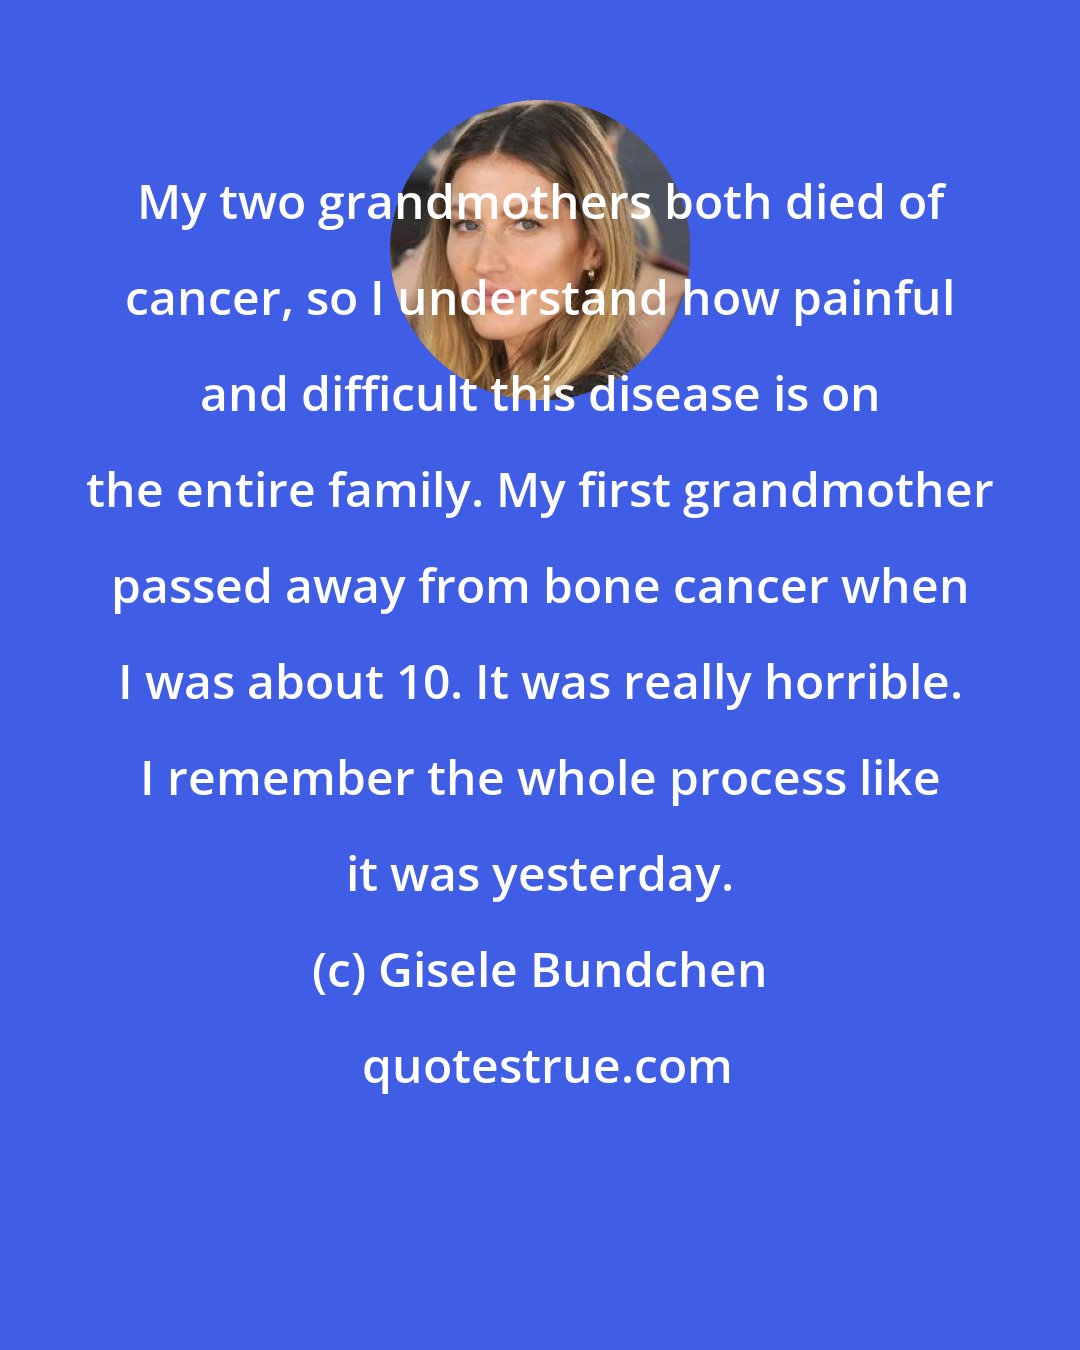 Gisele Bundchen: My two grandmothers both died of cancer, so I understand how painful and difficult this disease is on the entire family. My first grandmother passed away from bone cancer when I was about 10. It was really horrible. I remember the whole process like it was yesterday.